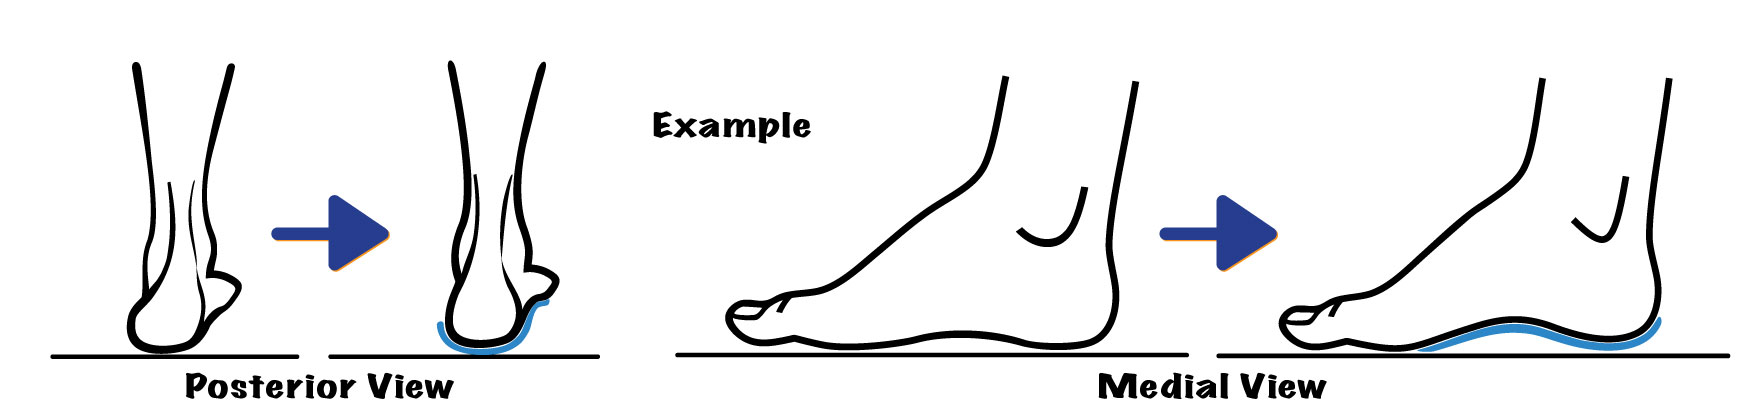 Image of orthotic supporting arch correctly